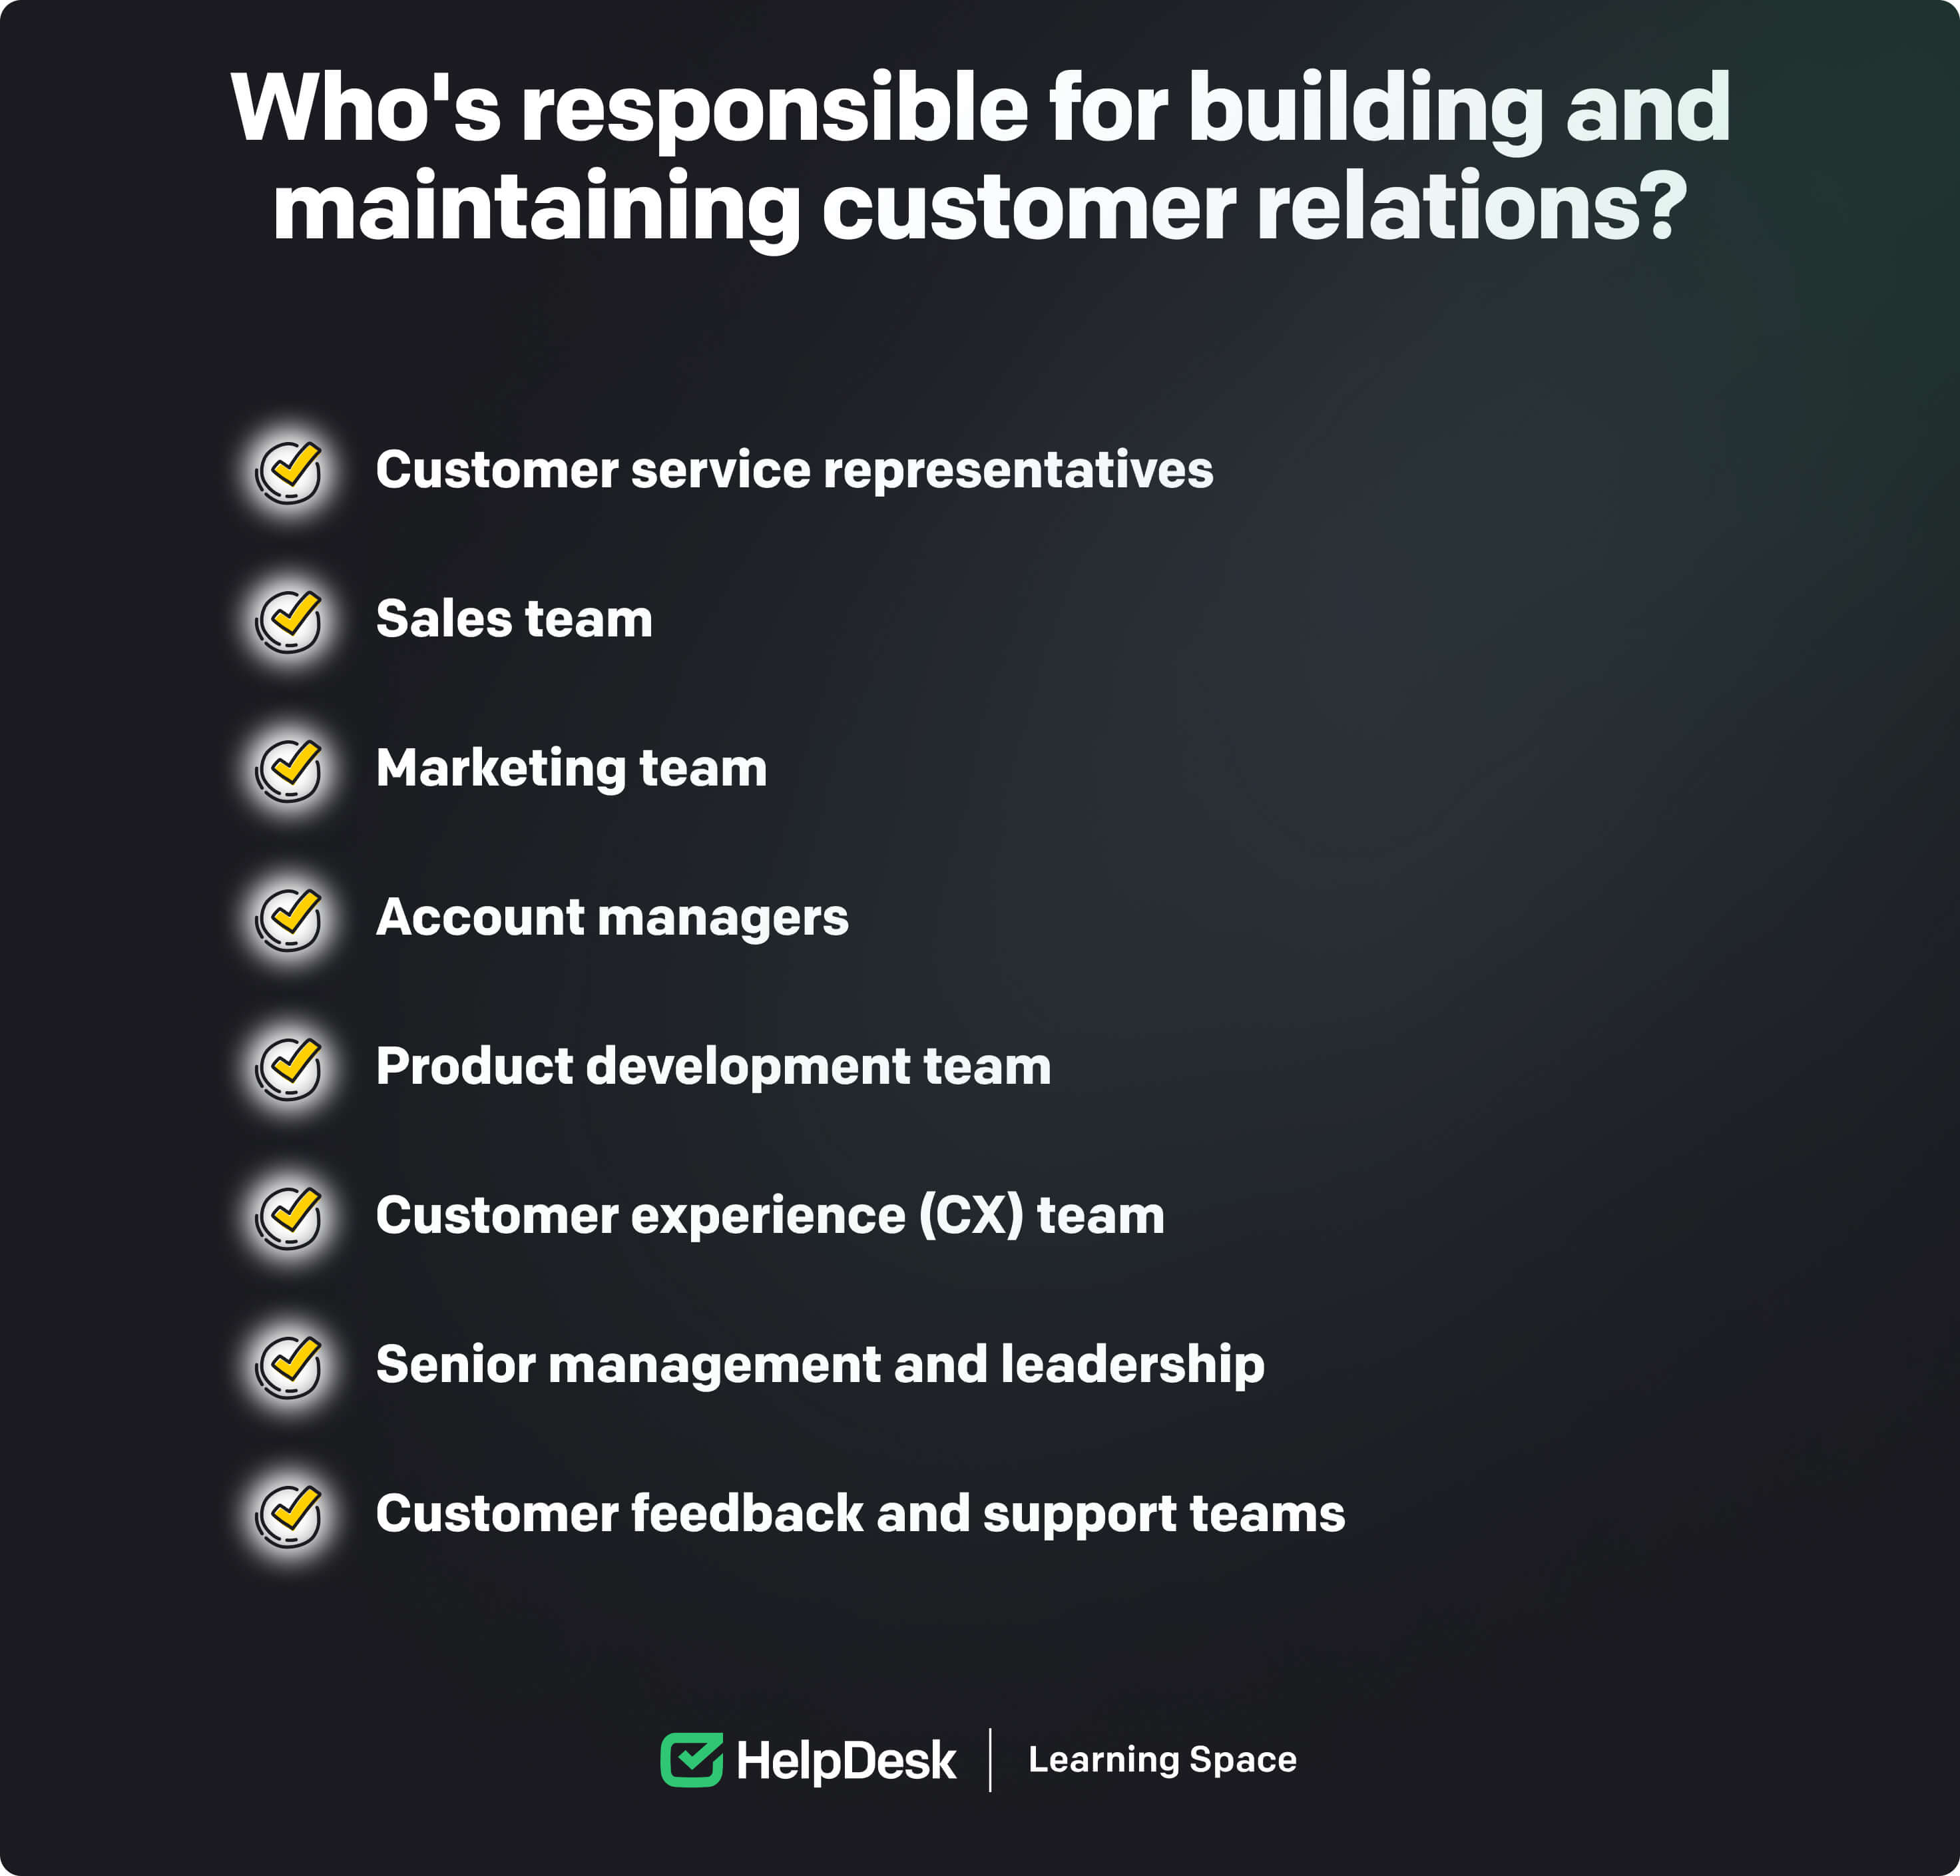 Departments responsible for building and maintaining customer relations